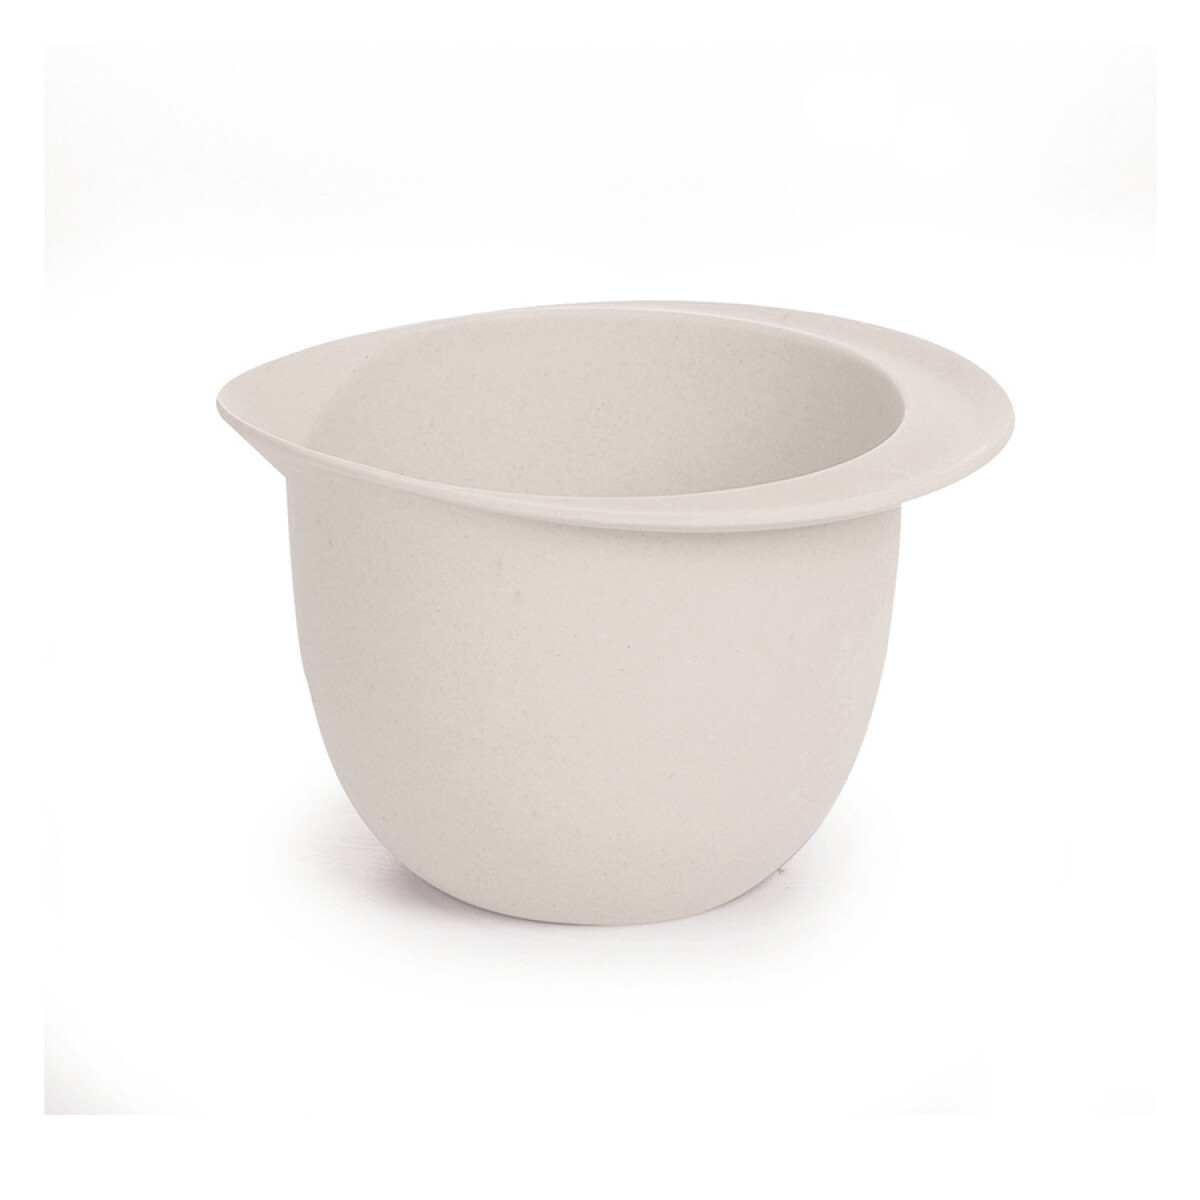 MIXING BOWL 2LT CMBAMBOO ECOLOGICO. 21X18X13 